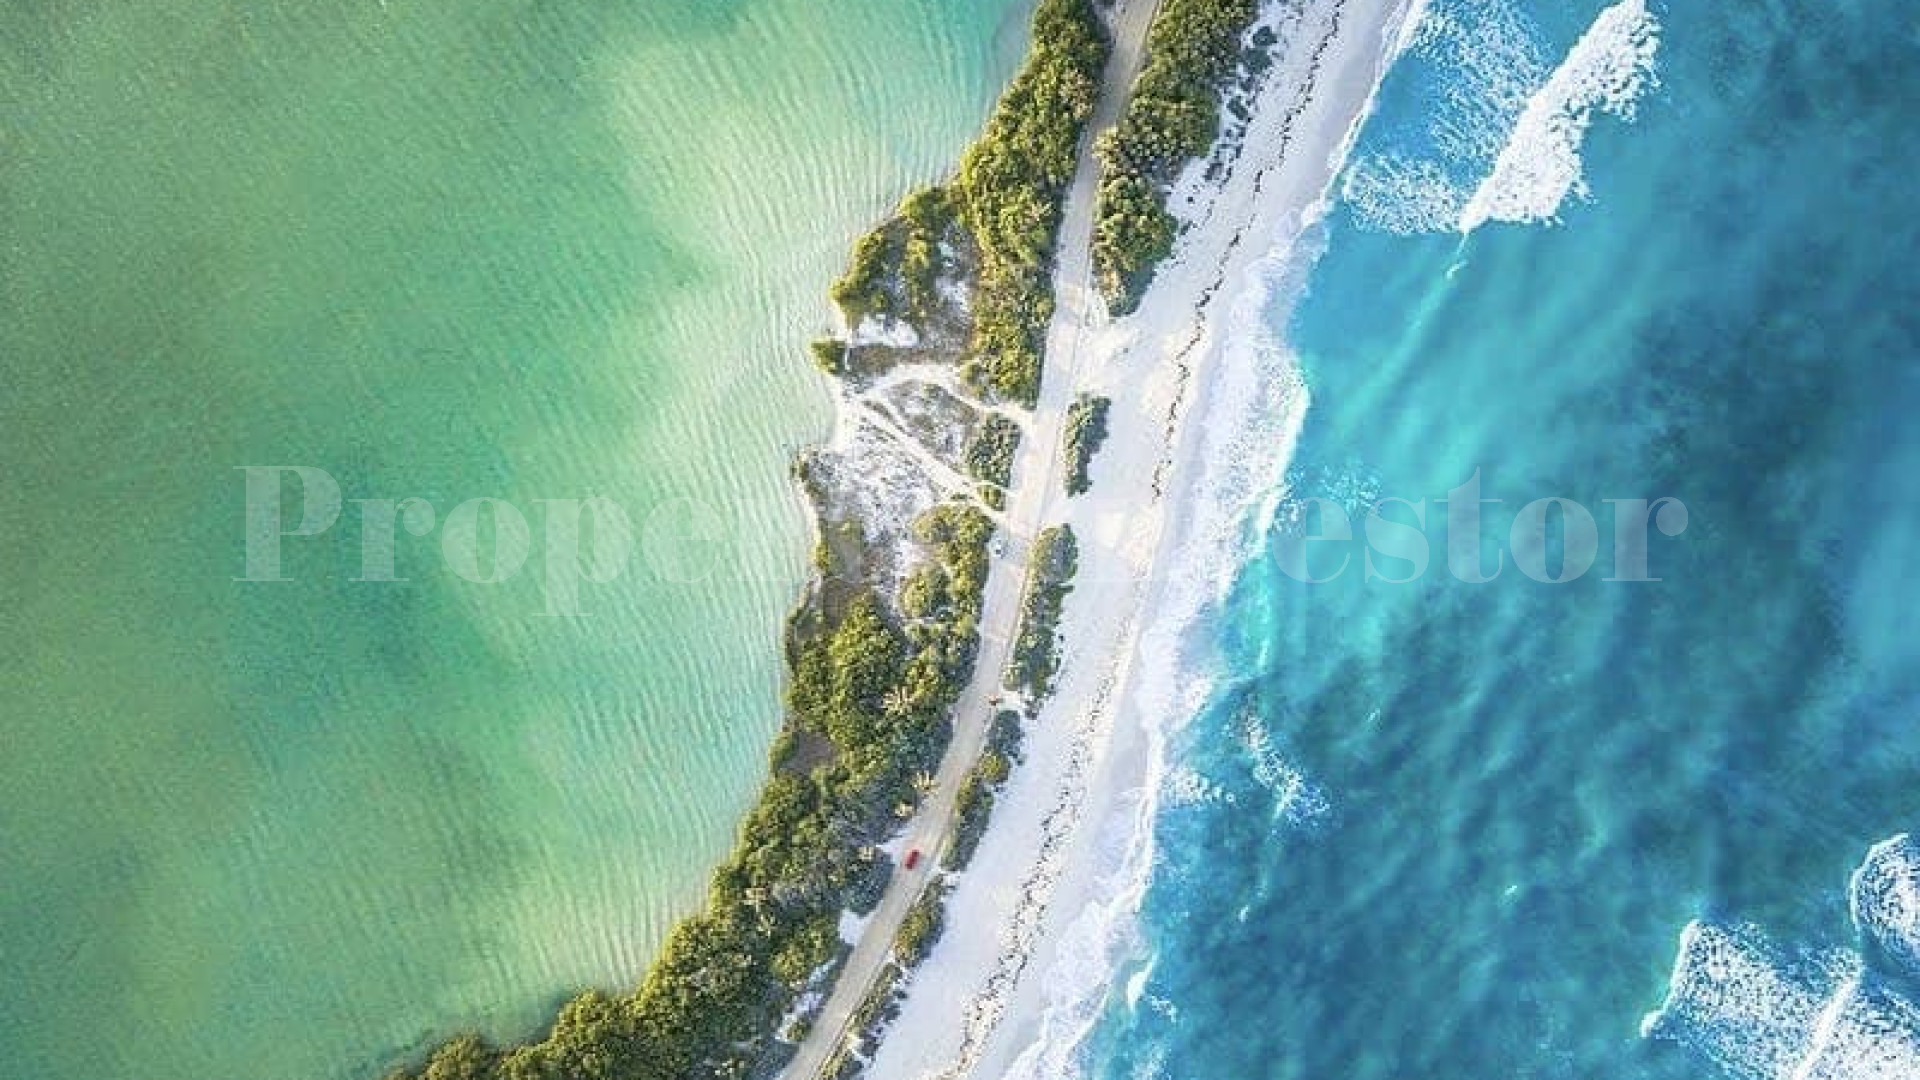 Incredible 2.37 Hectare Beachfront Lot with 100 Metres of Private Beach & Lagoon Access for Sale in Sian Ka'an Biosphere Reserve, Tulum, Mexico